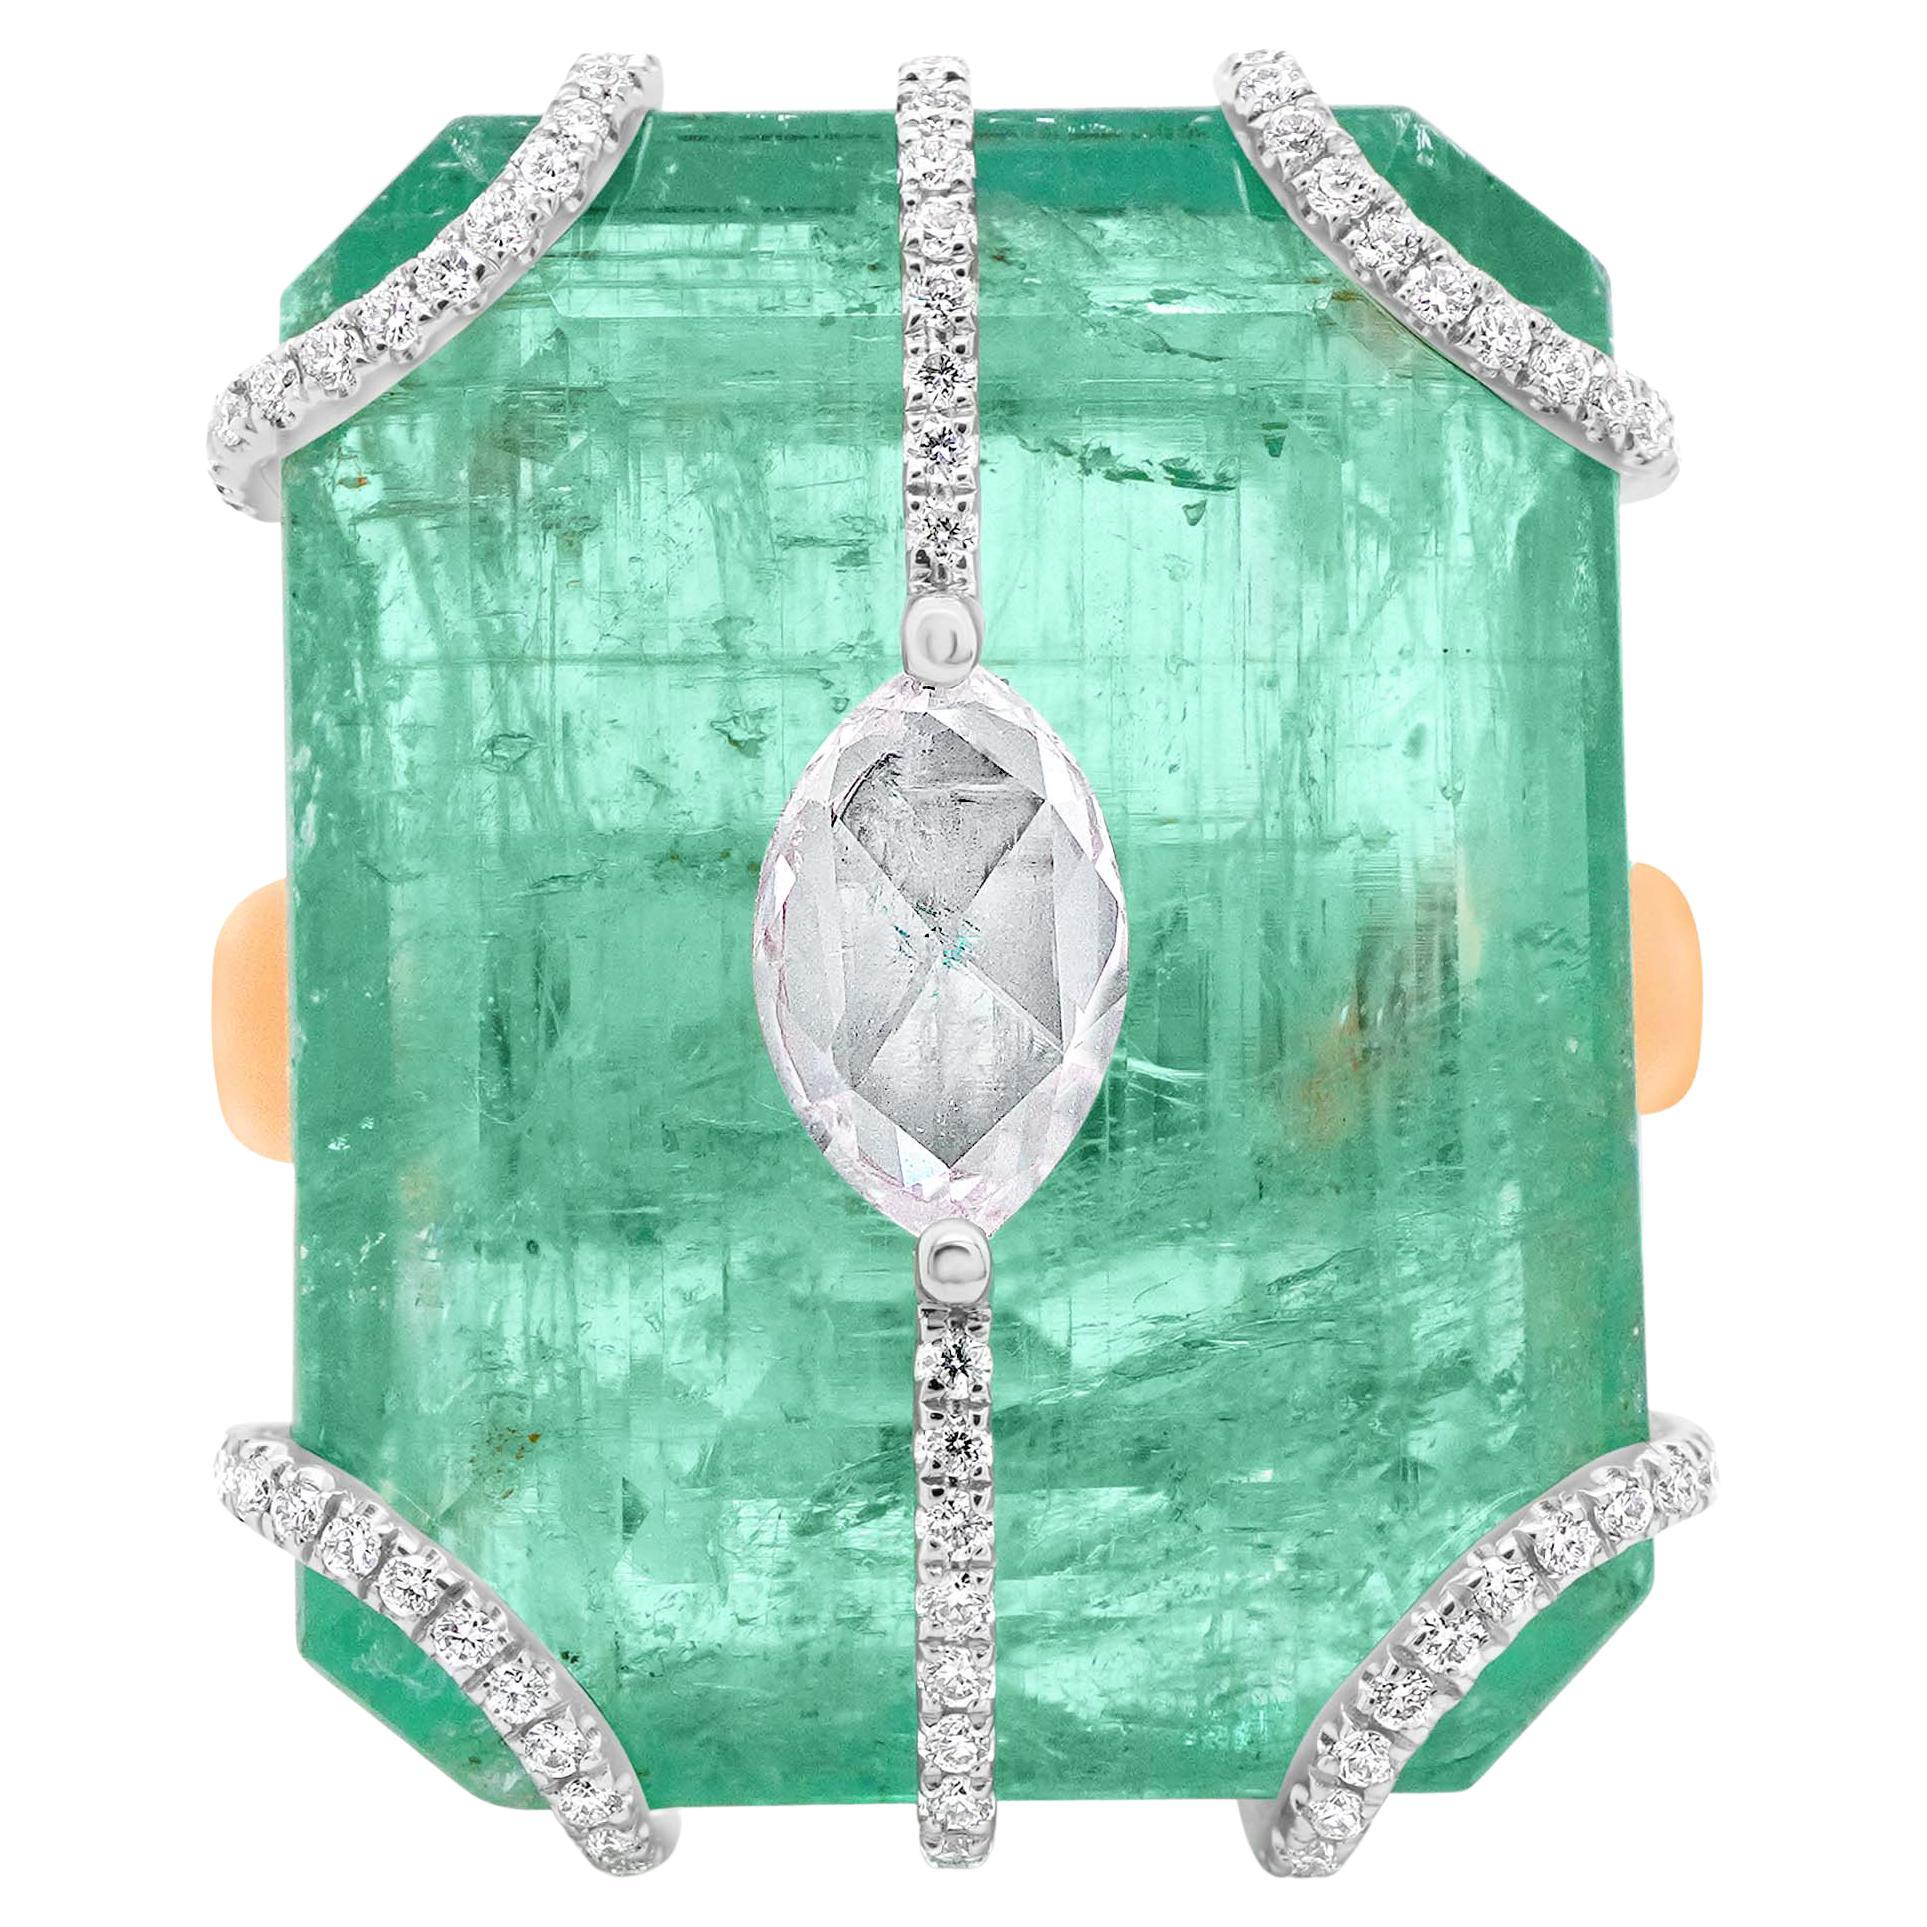 25.81 Carat Colombian Emerald Studded with White Diamond Crown Statement Ring For Sale